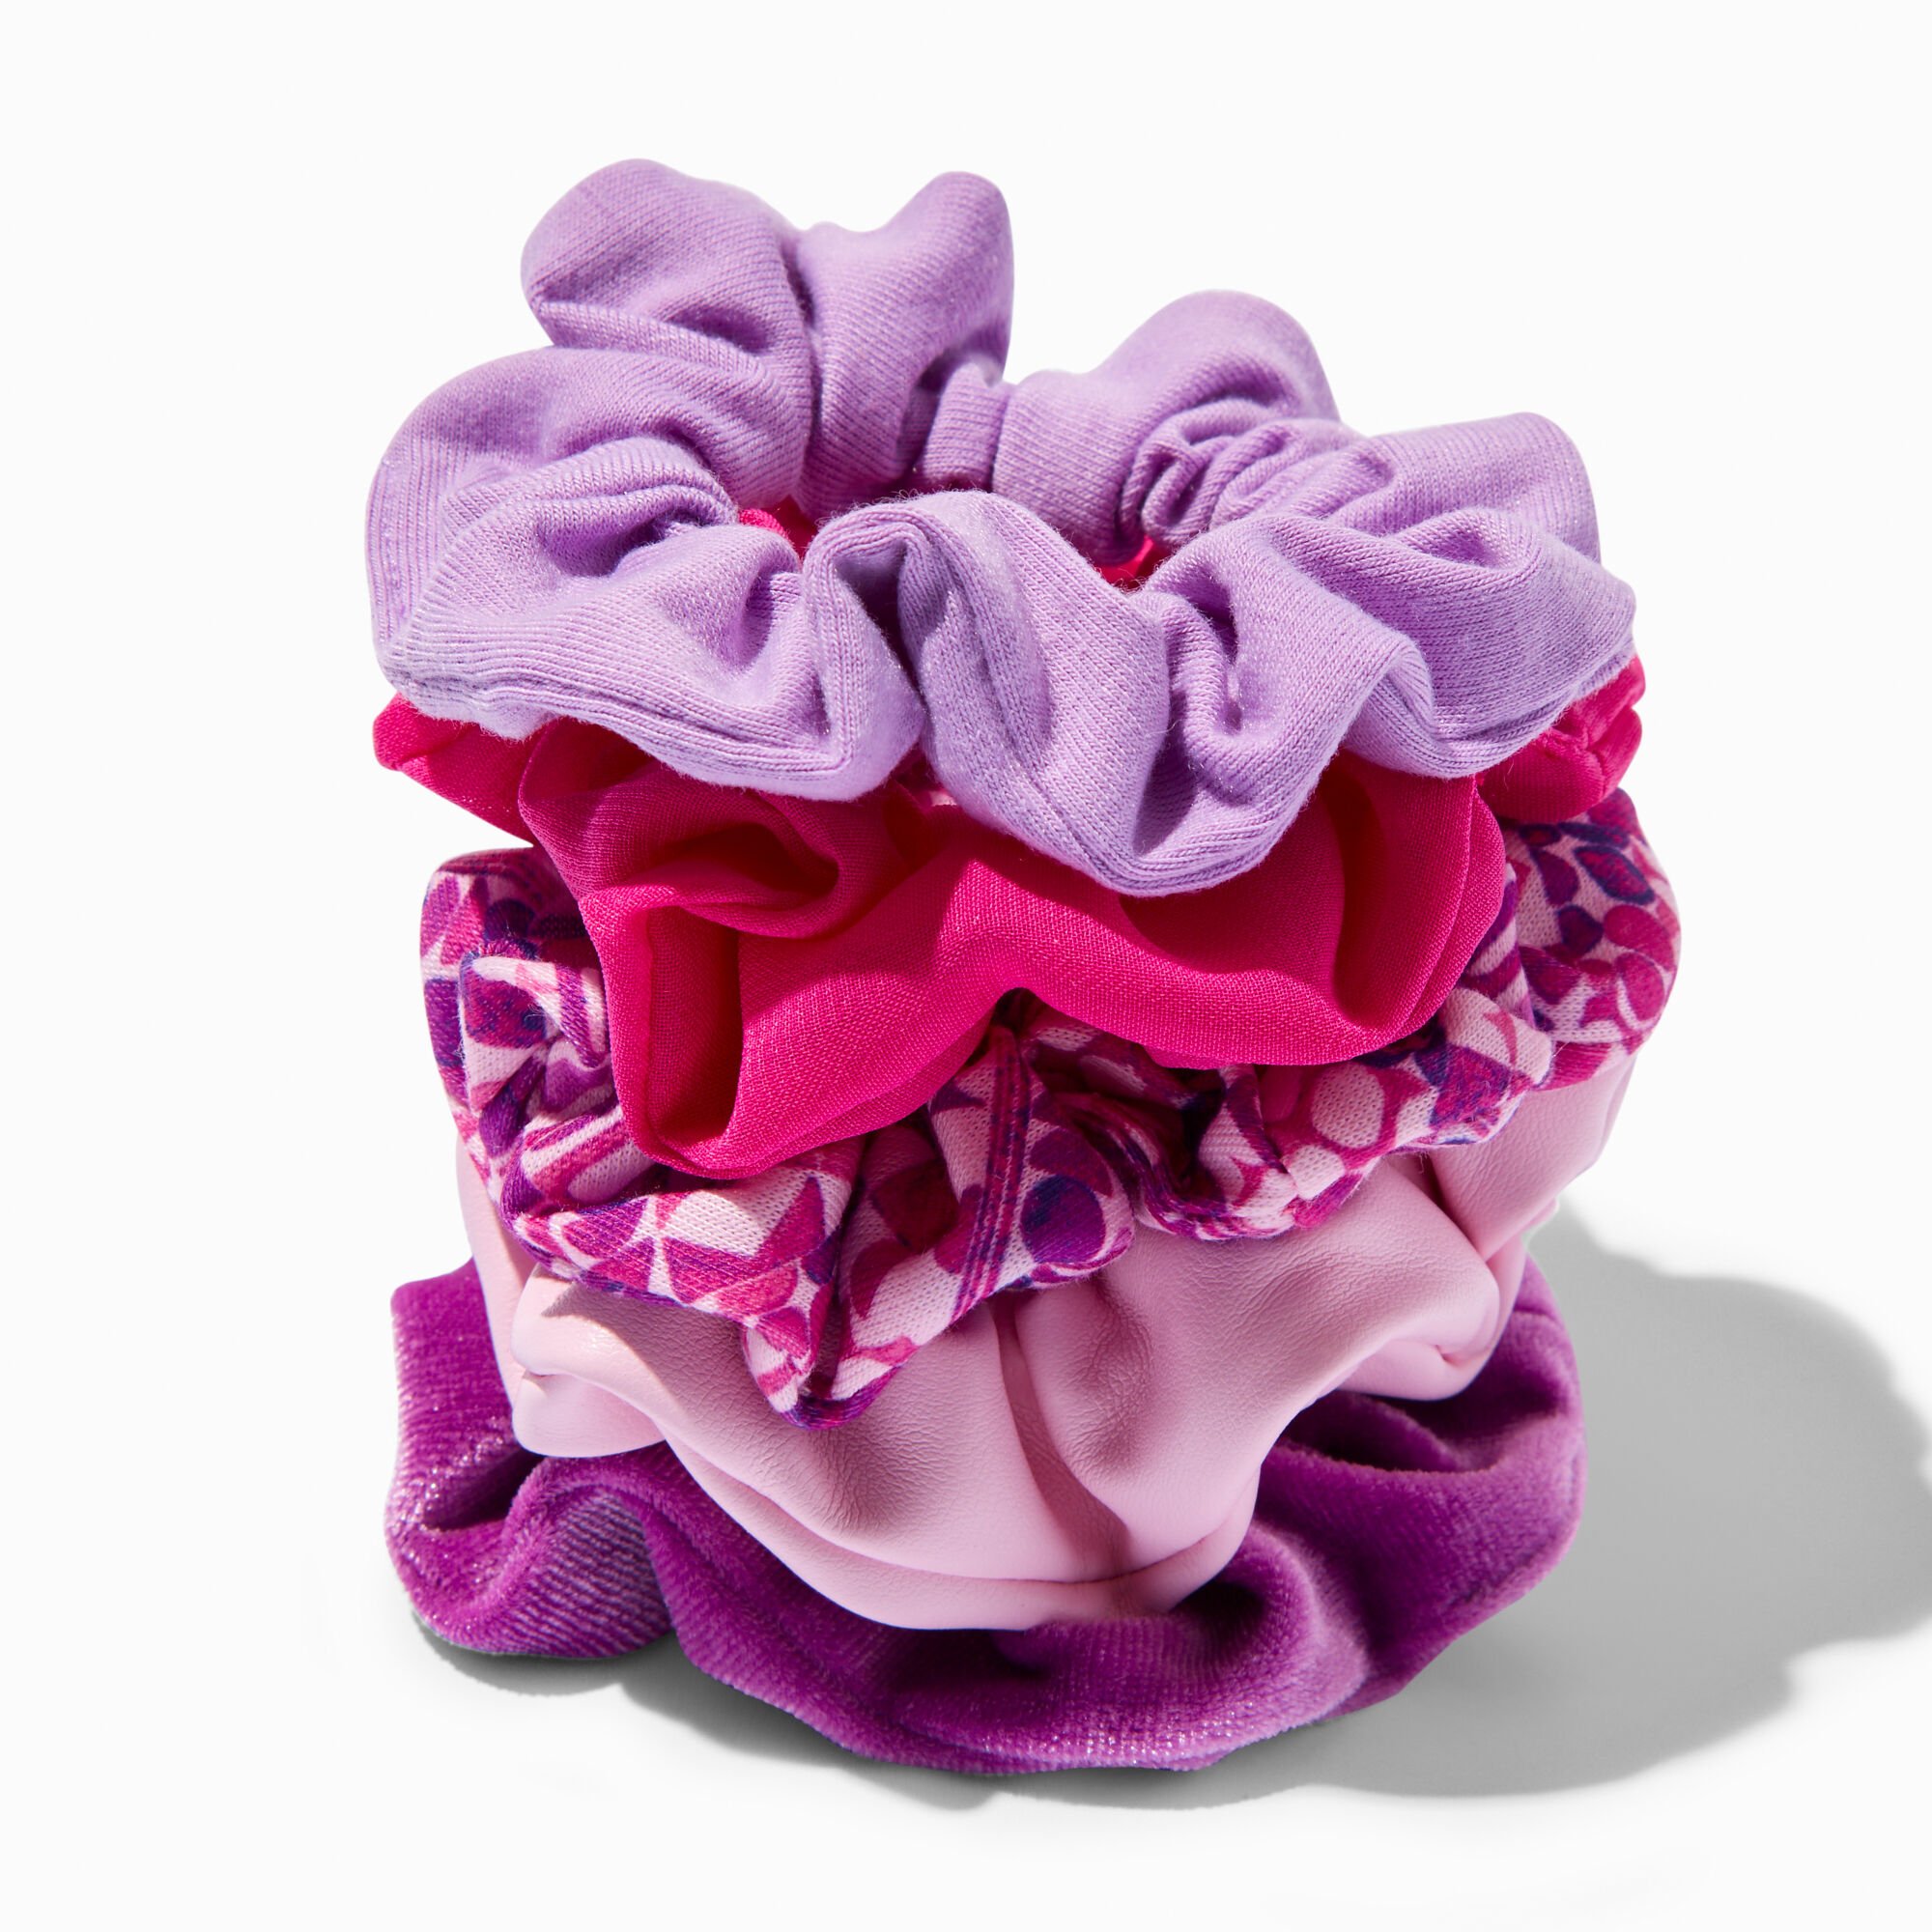 View Claires Geometric Hair Scrunchies 5 Pack Purple information